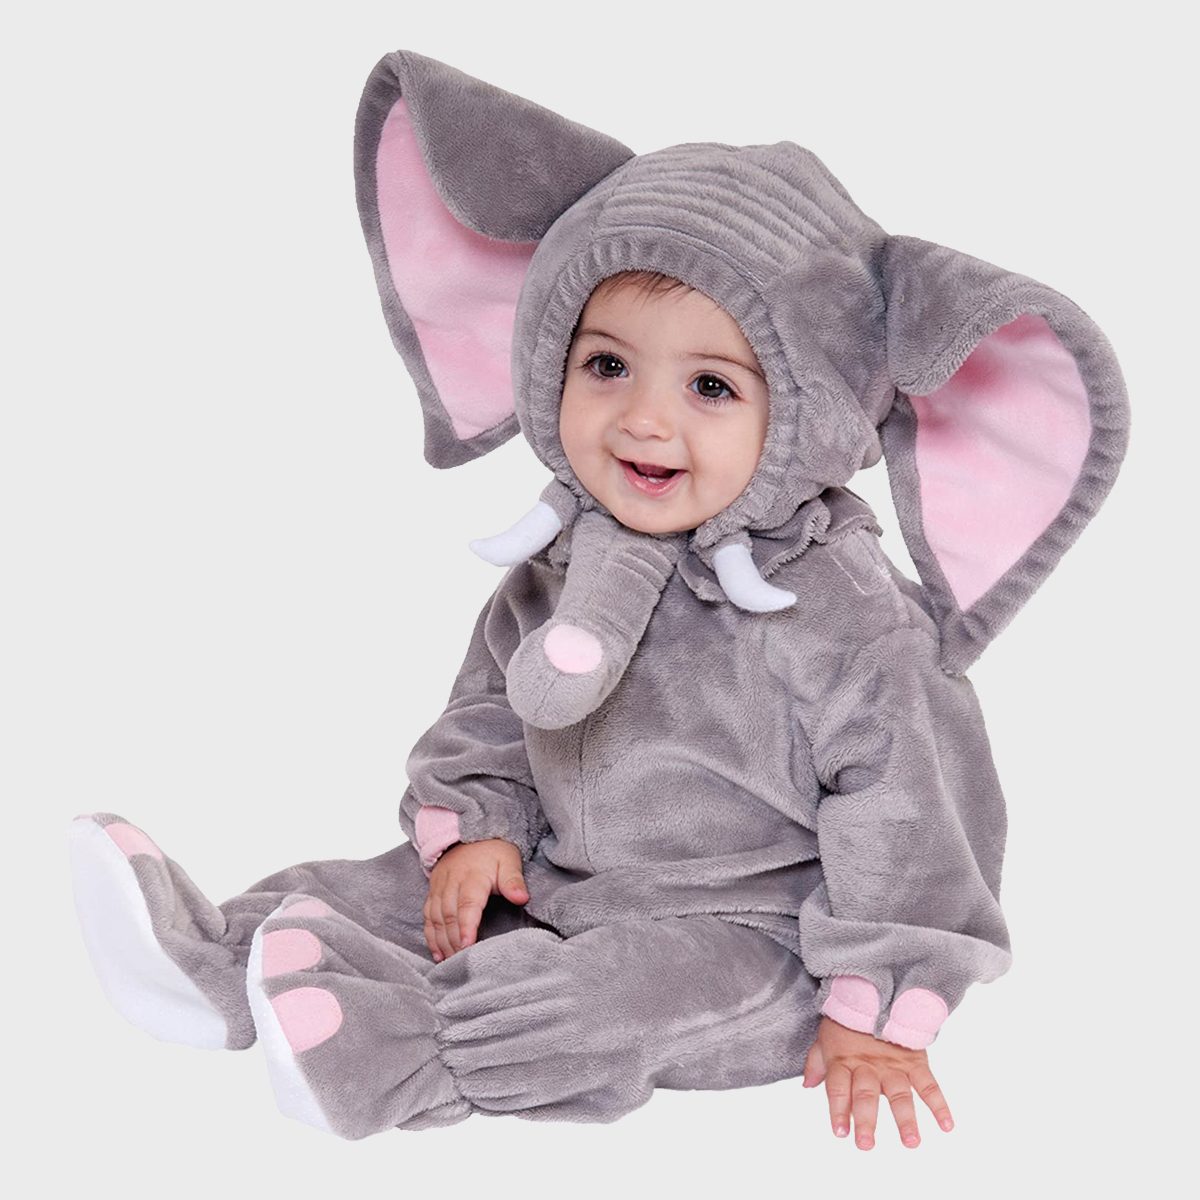 35 Best Baby Costume Ideas for 2022 | Baby Halloween Costumes